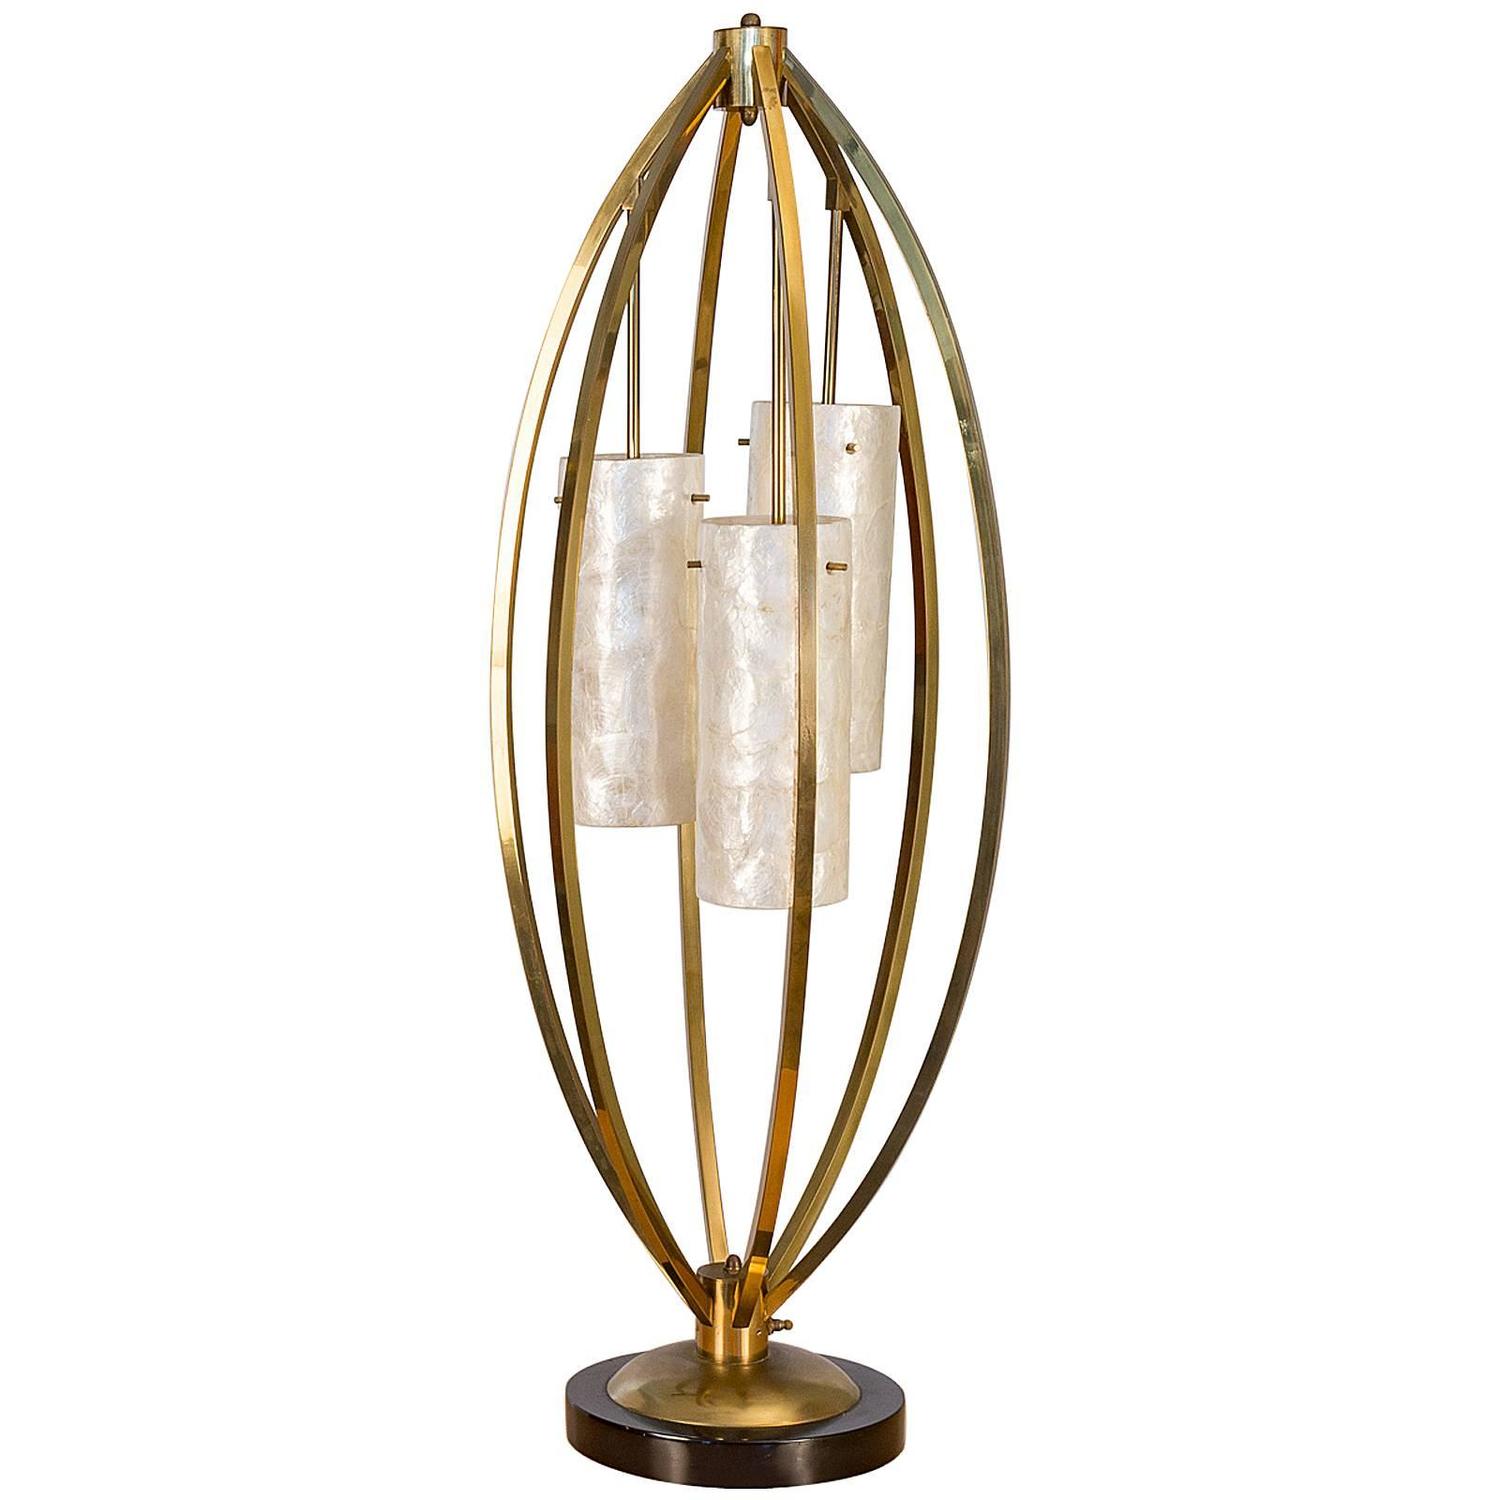 Brass and Capiz Shell Table Lamp For Sale at 1stdibs